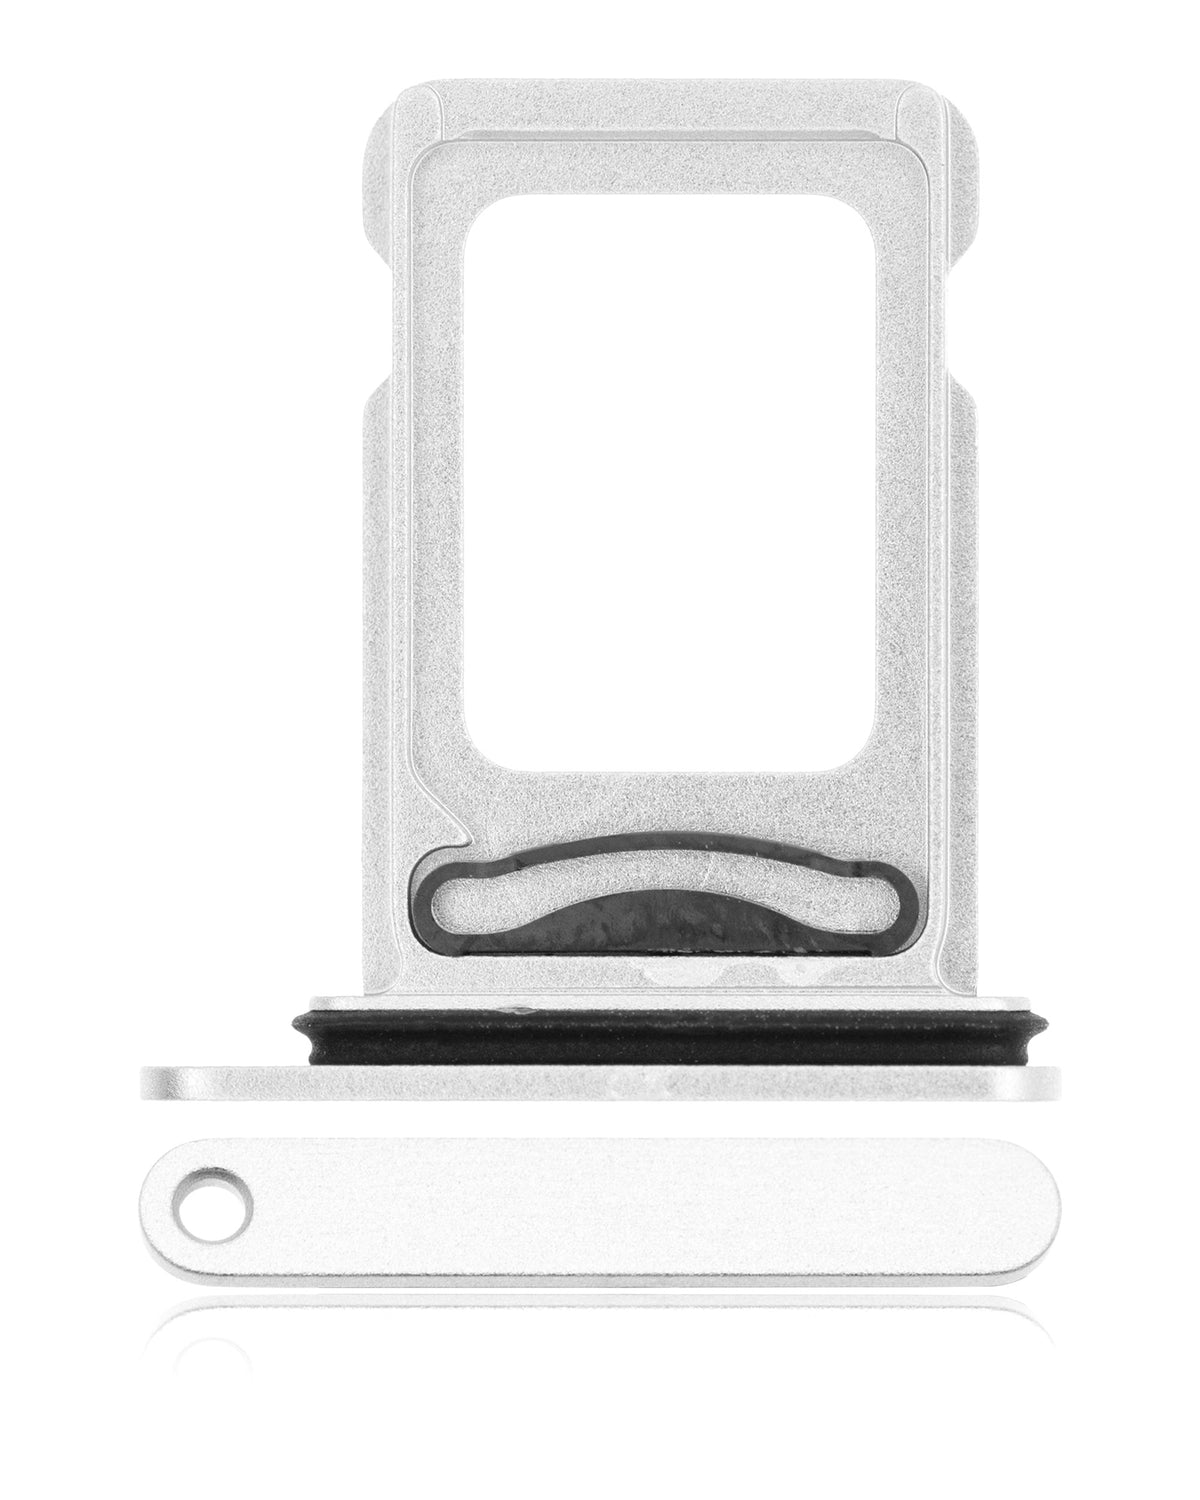 WHITE DUAL SIM CARD TRAY COMPATIBLE WITH IPHONE 12